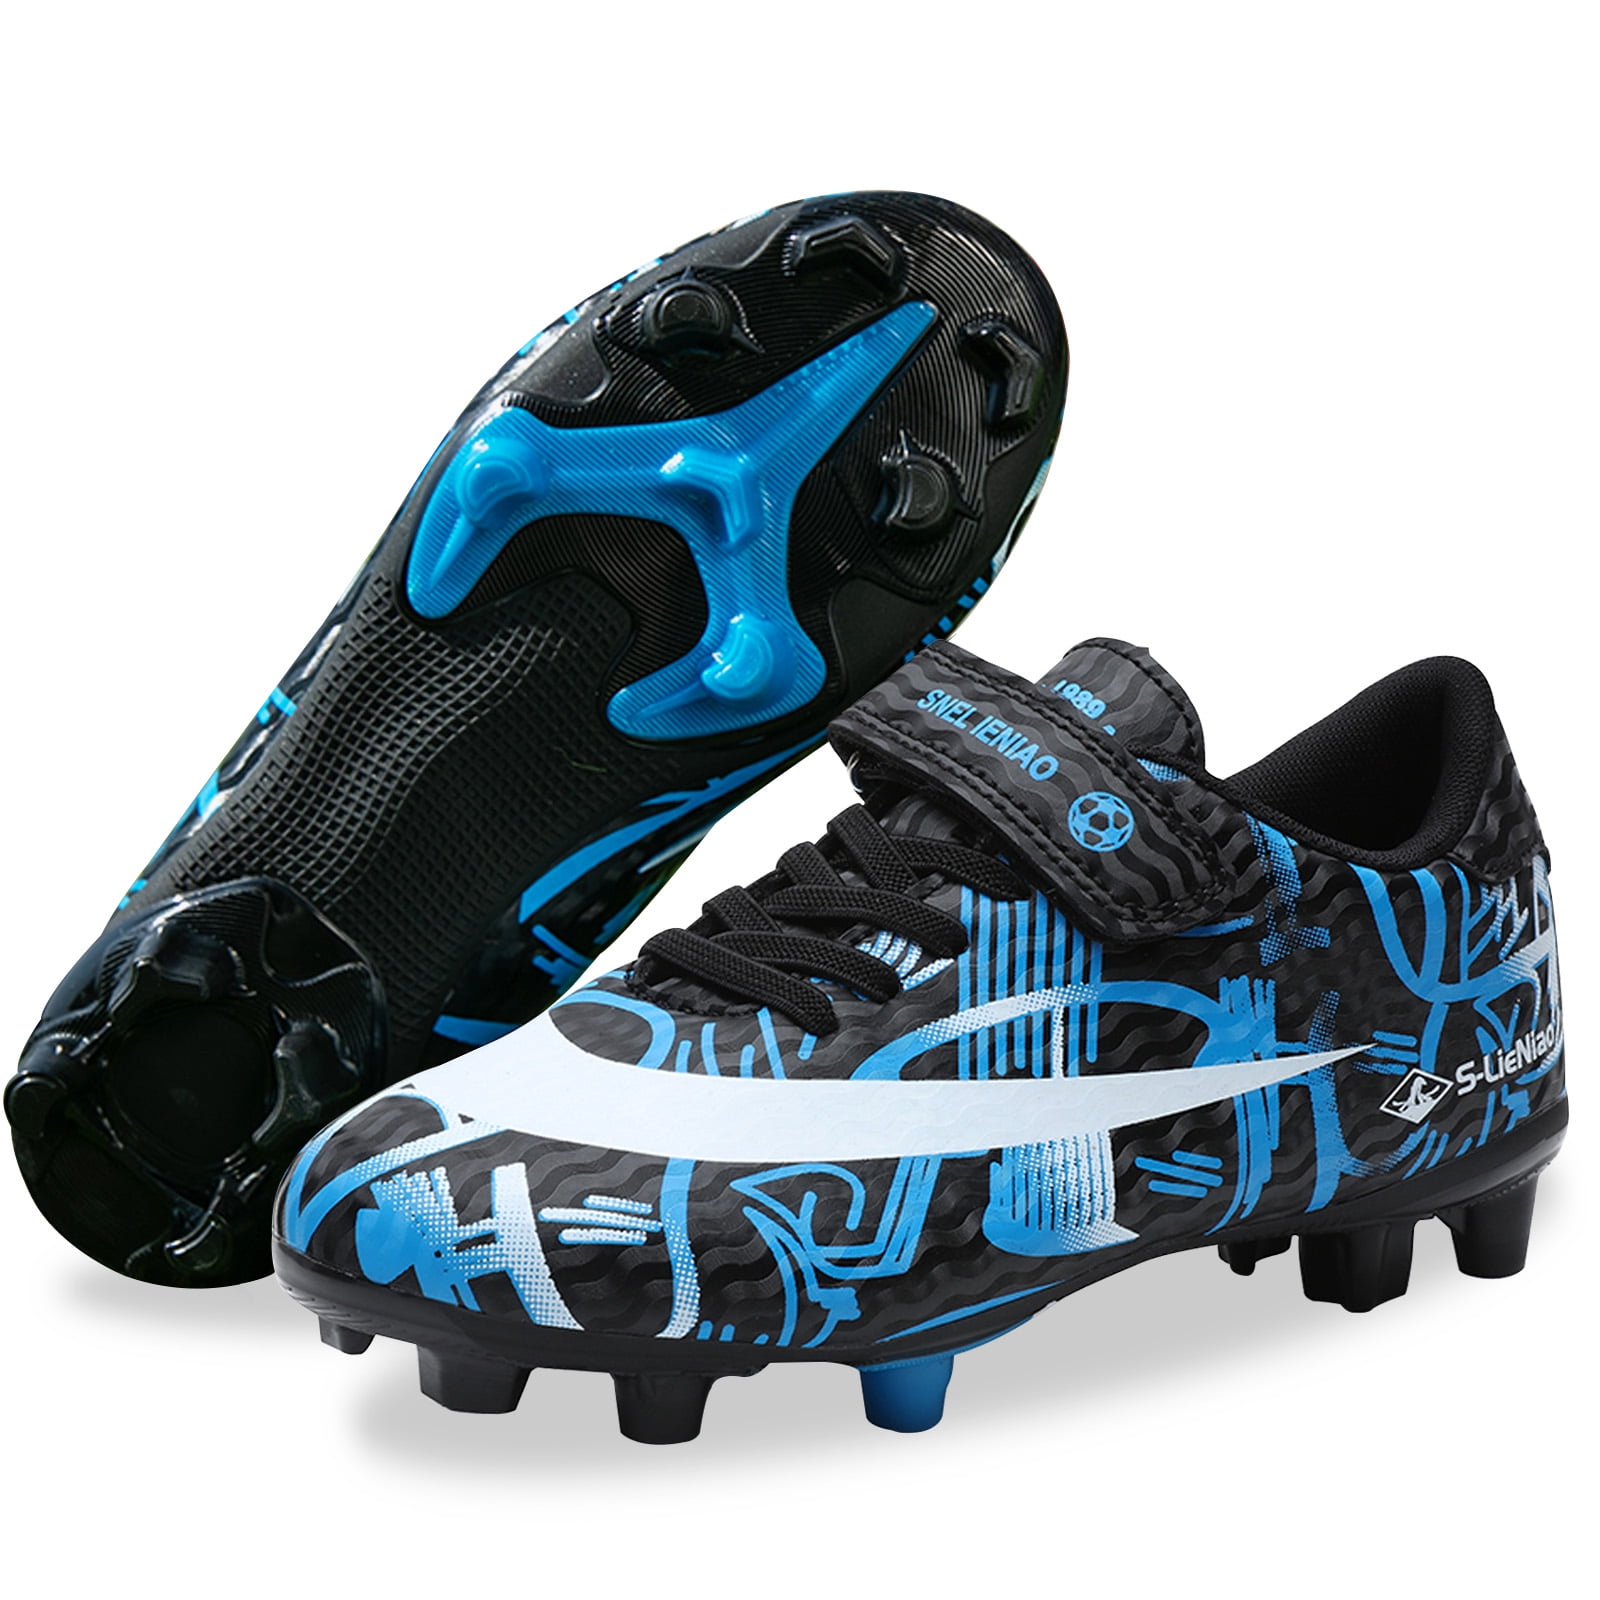 Details about   Men Teens Boys Soccer Shoes Football Sneakers Soccer Outdoor Soccer Cleats Shoes 